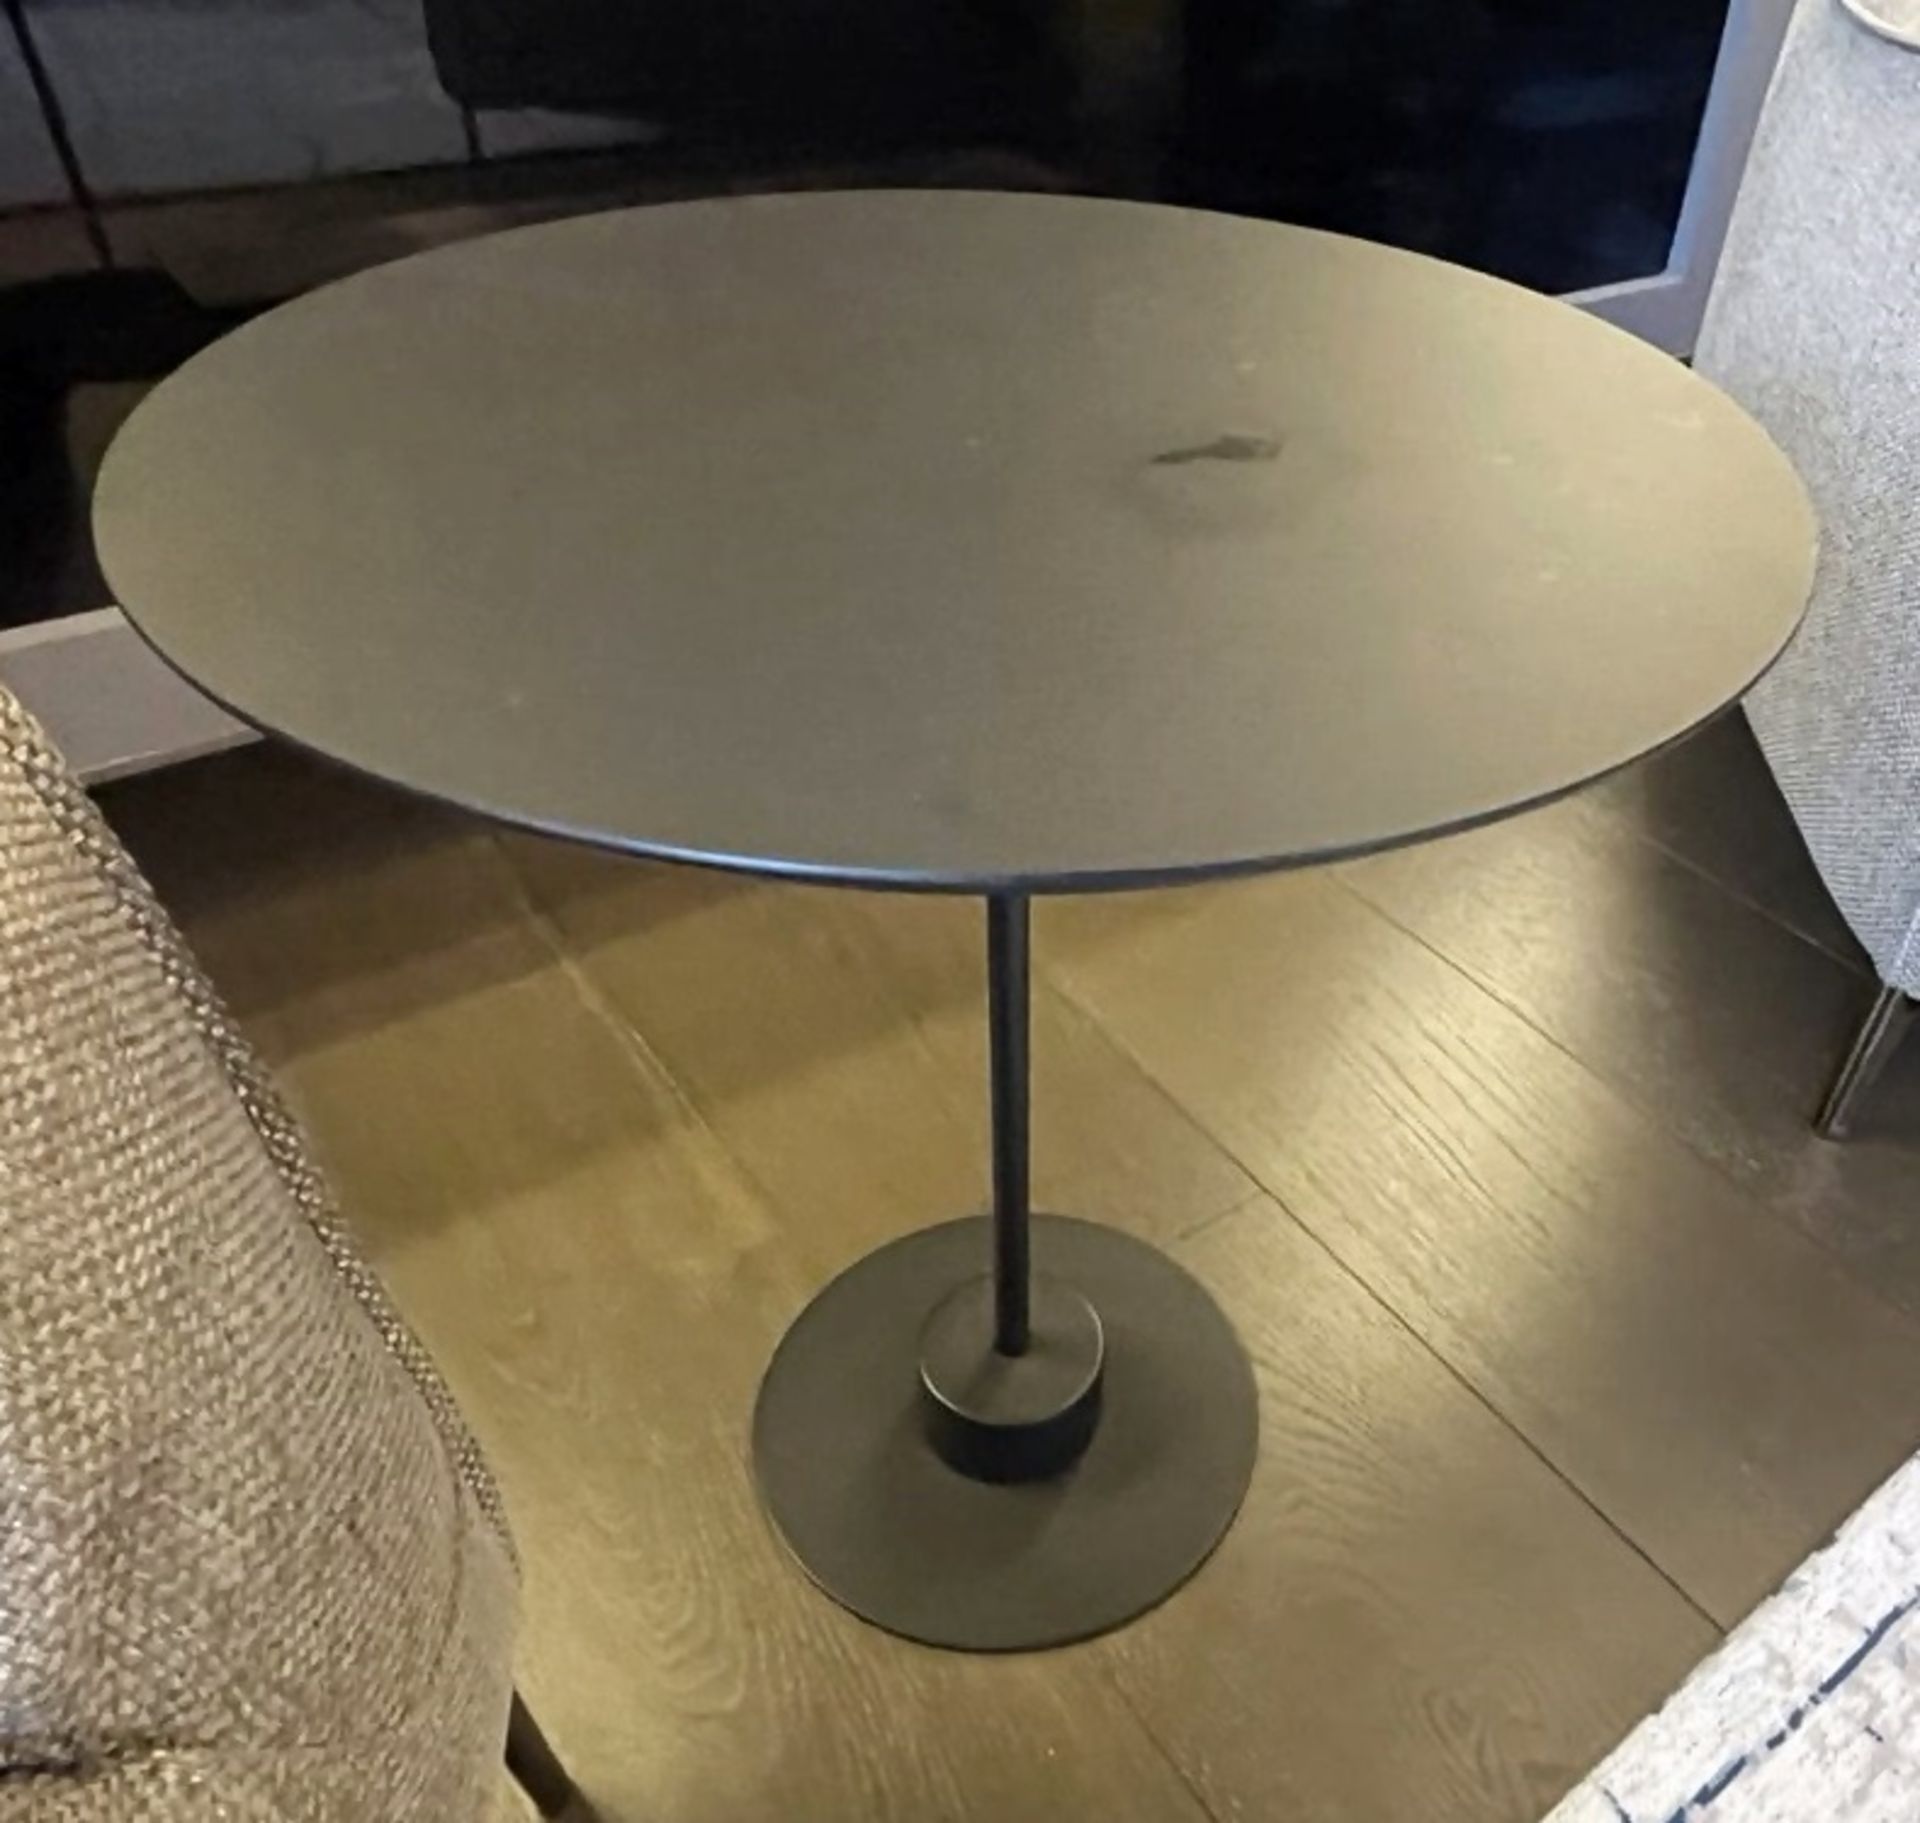 1 x Stylish Round Occasional Metal Table with a Bronzed Finish and Industrial Aesthetic